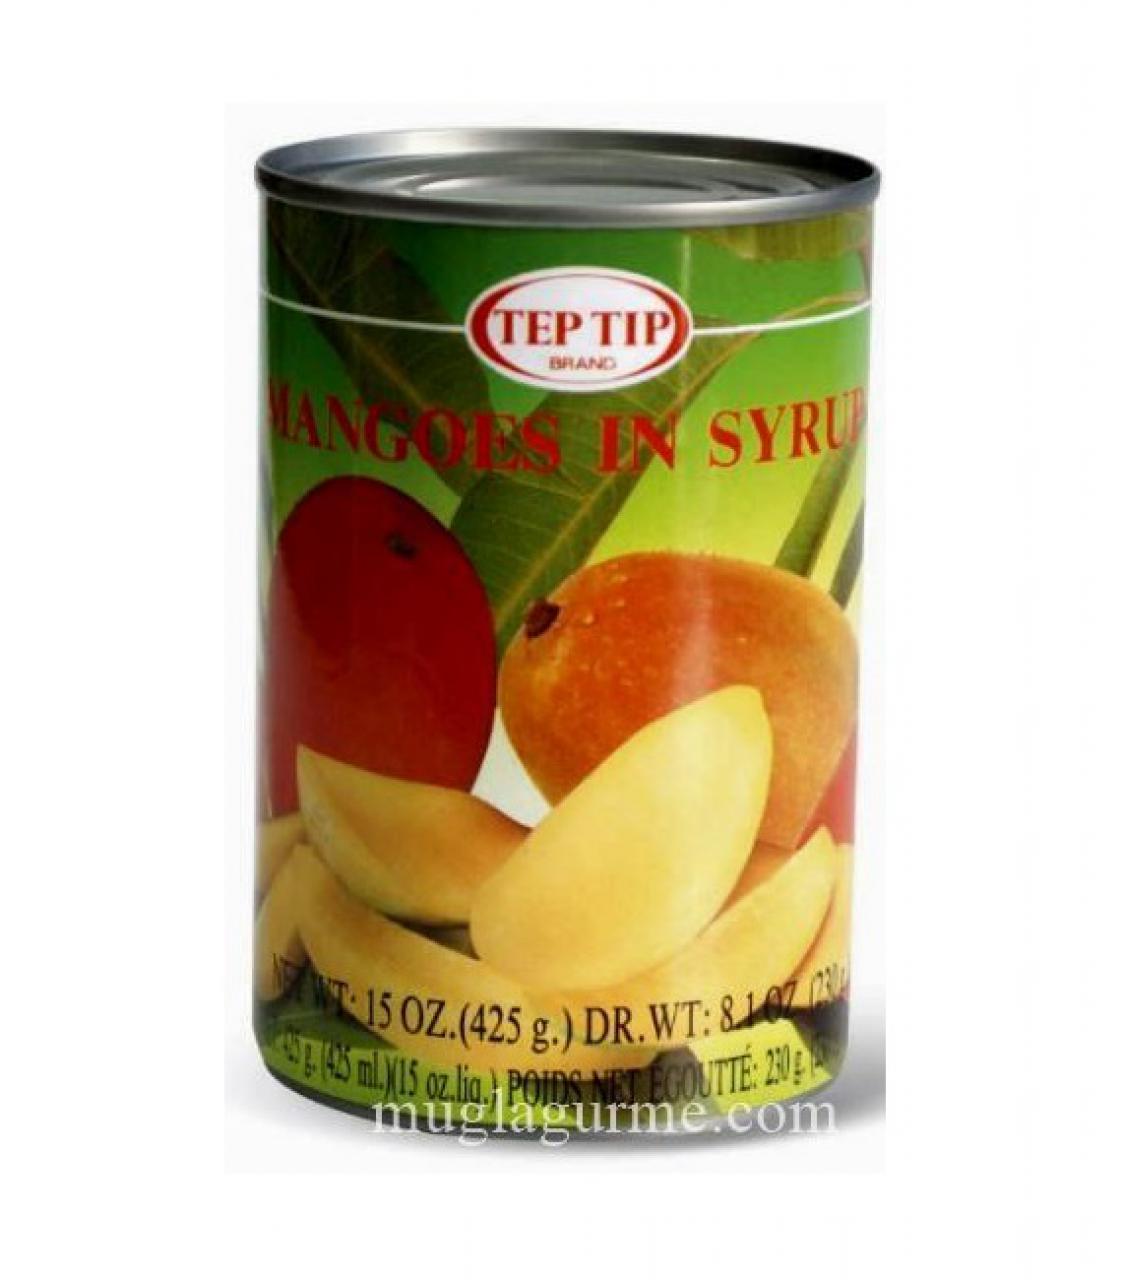 TEPTIP MANGO IN SYRUP